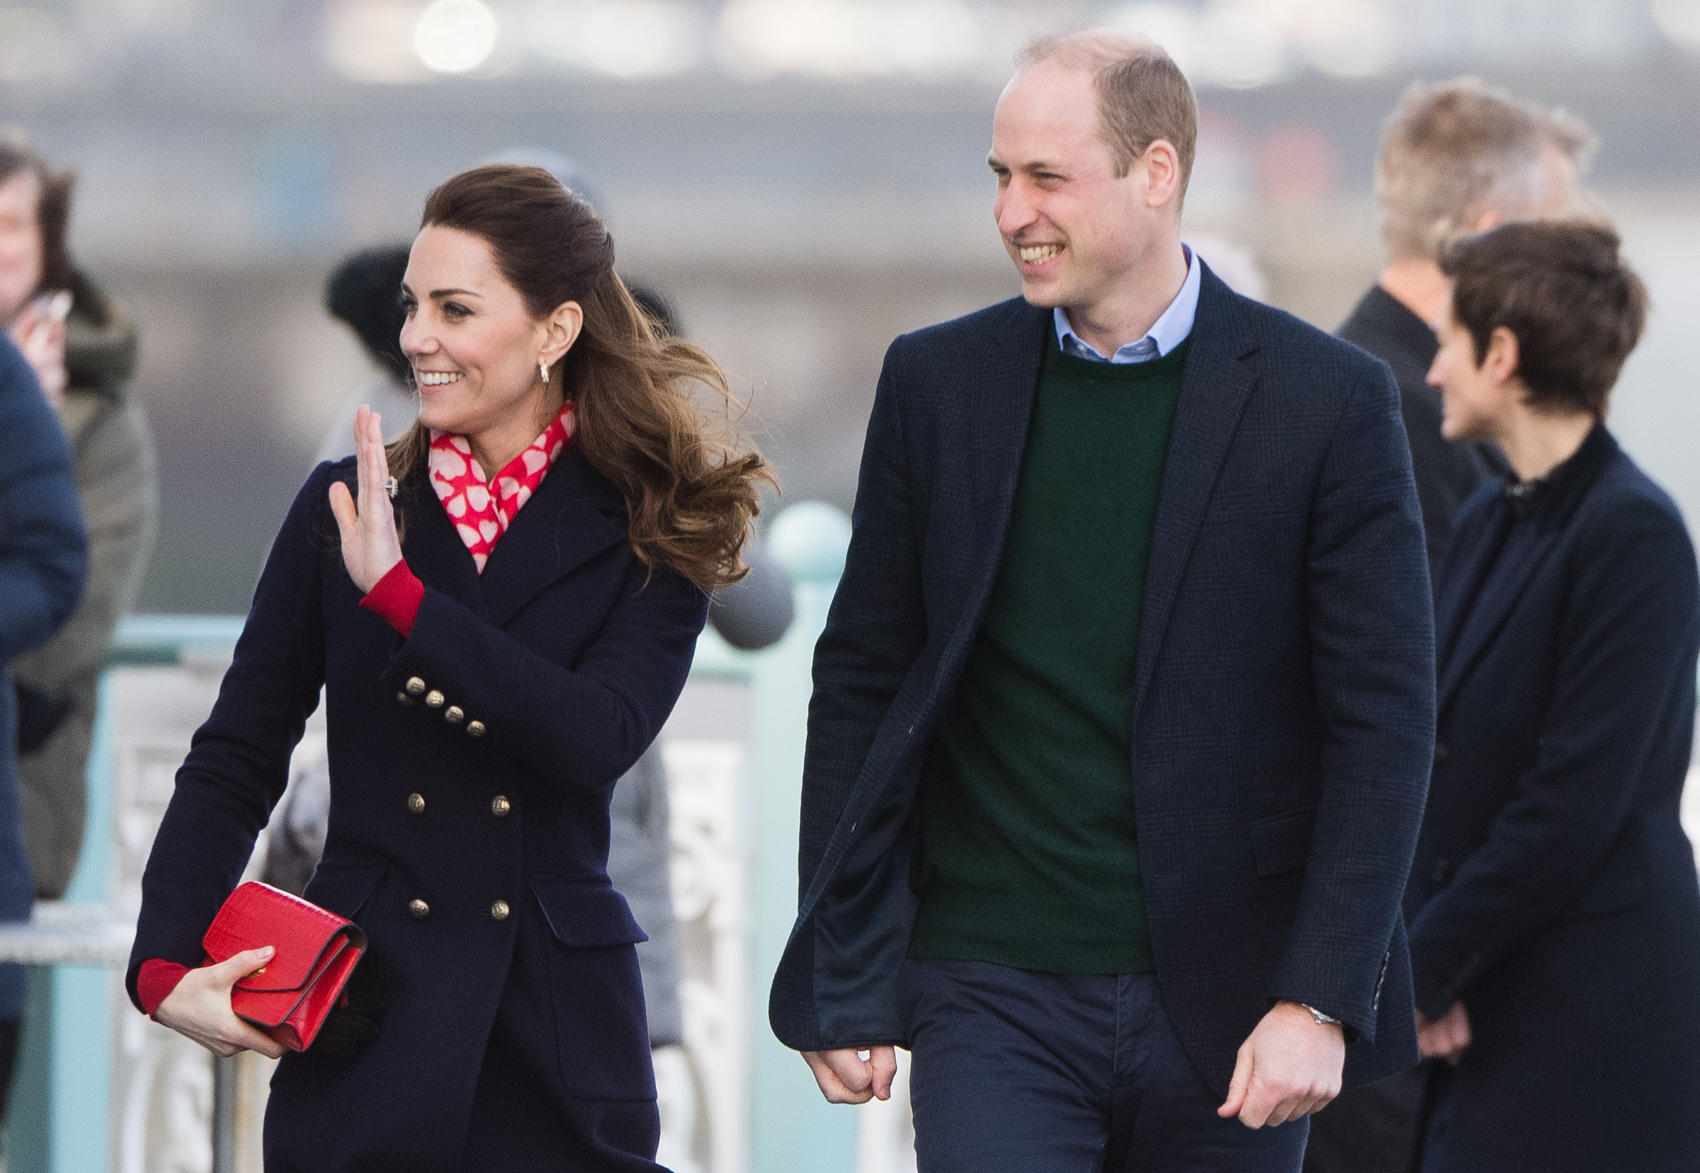 Prince William and Kate visit Mumbles Pier (Photo by Samir Hussein/WireImage)